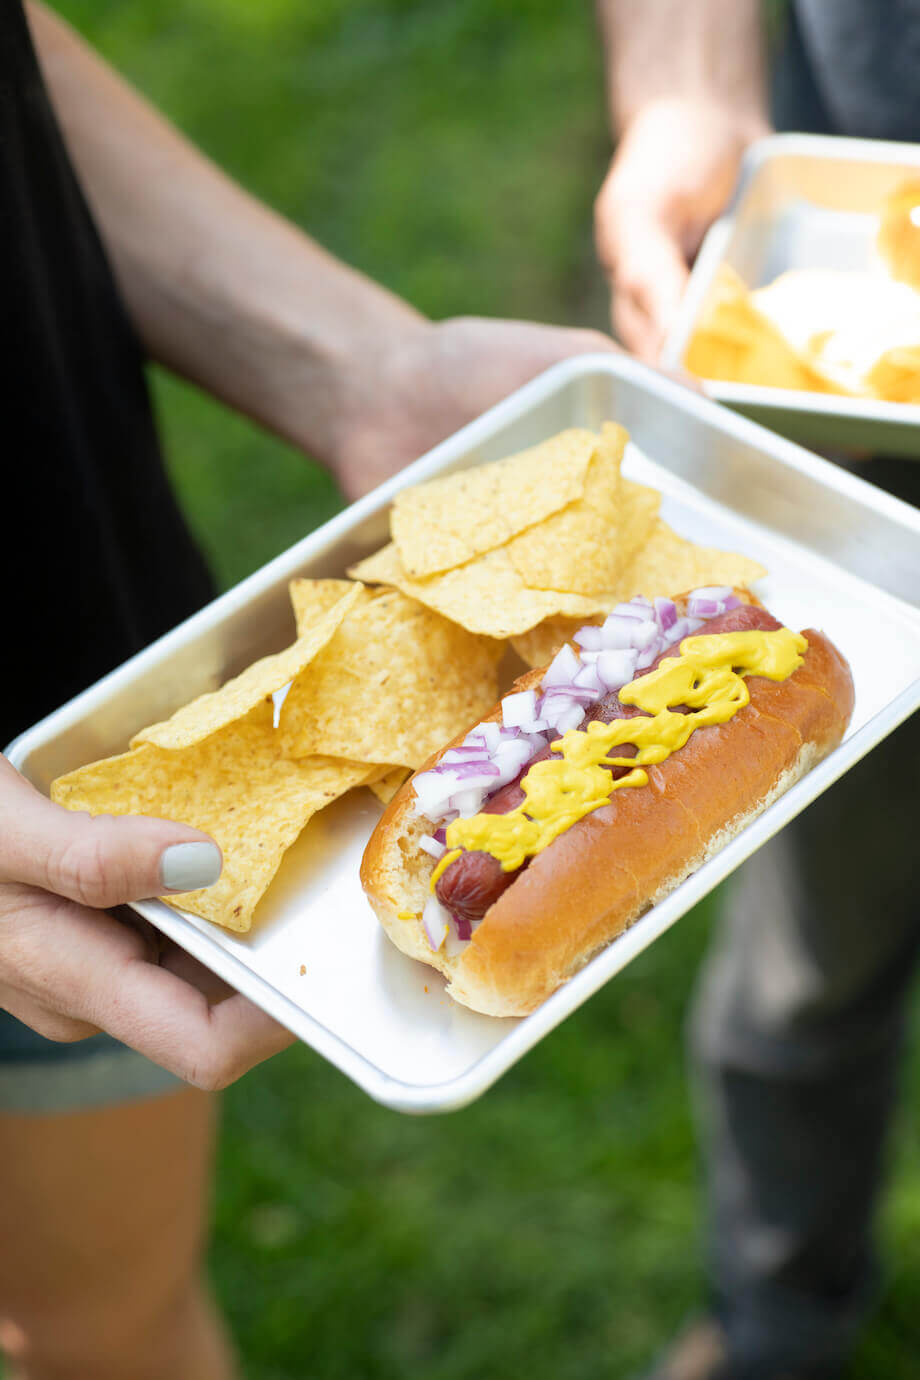 hands holding hot dog tray with chips on the side